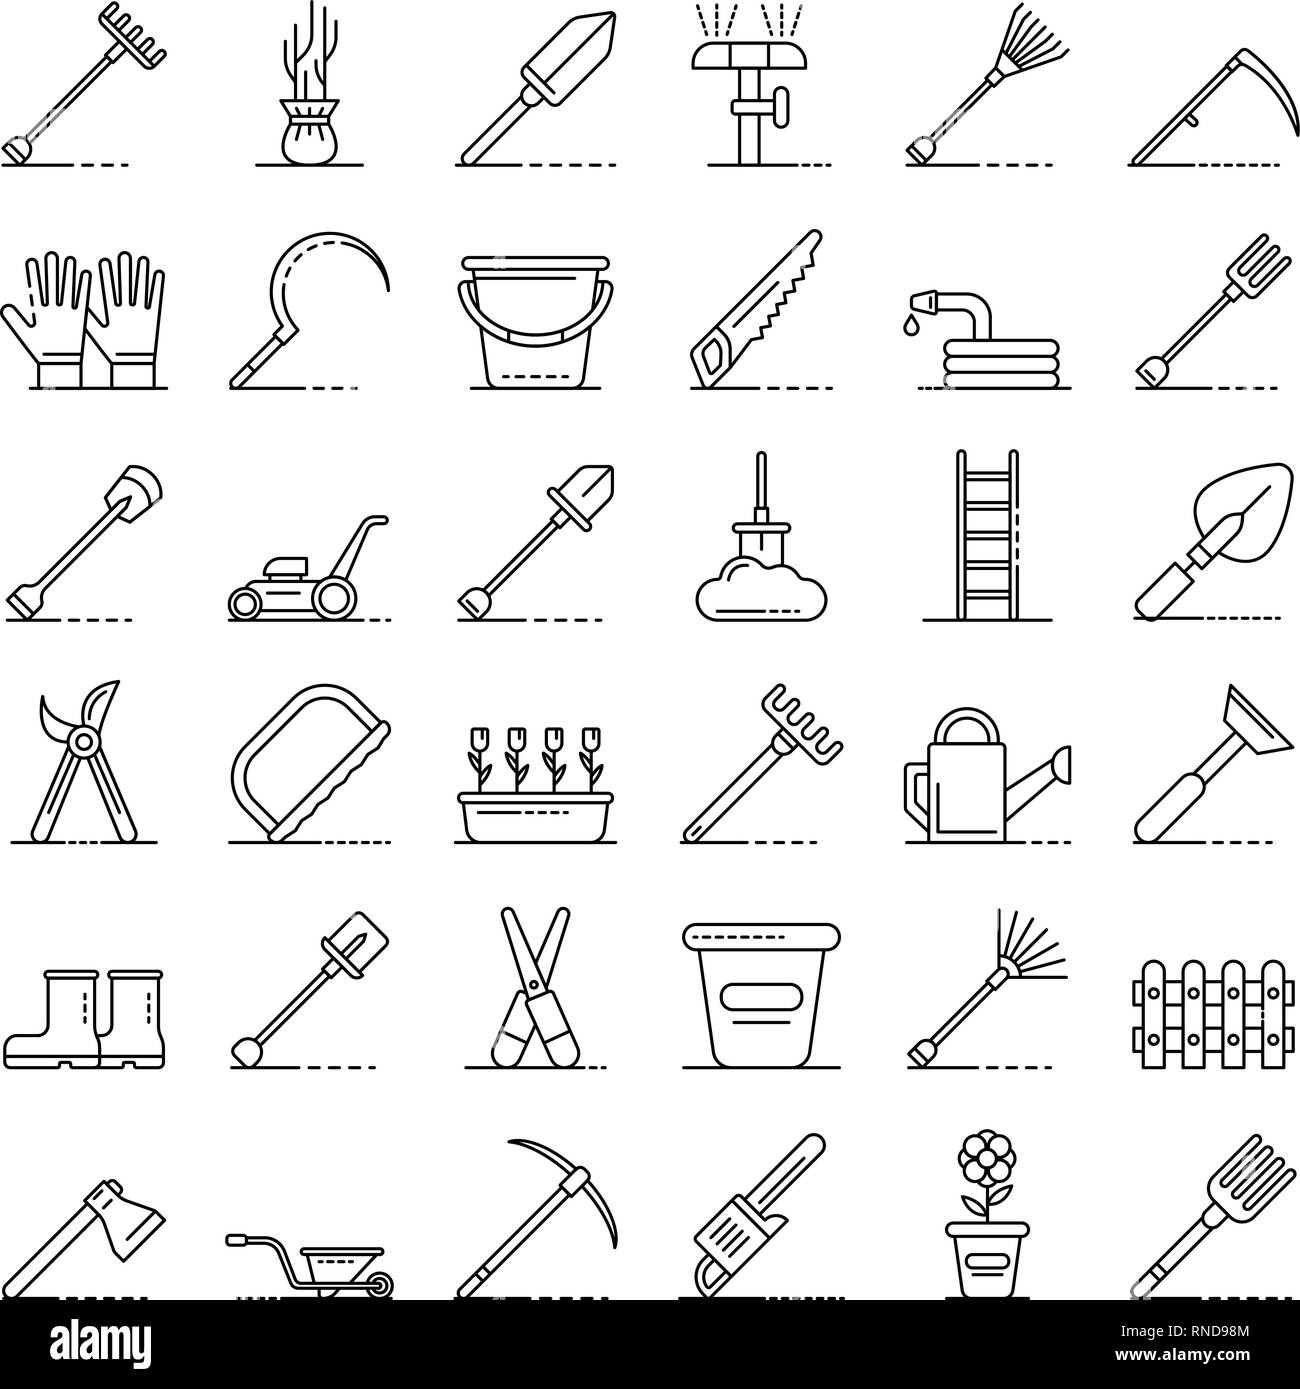 Gardening Tools Icons Set Outline Style Stock Vector Art